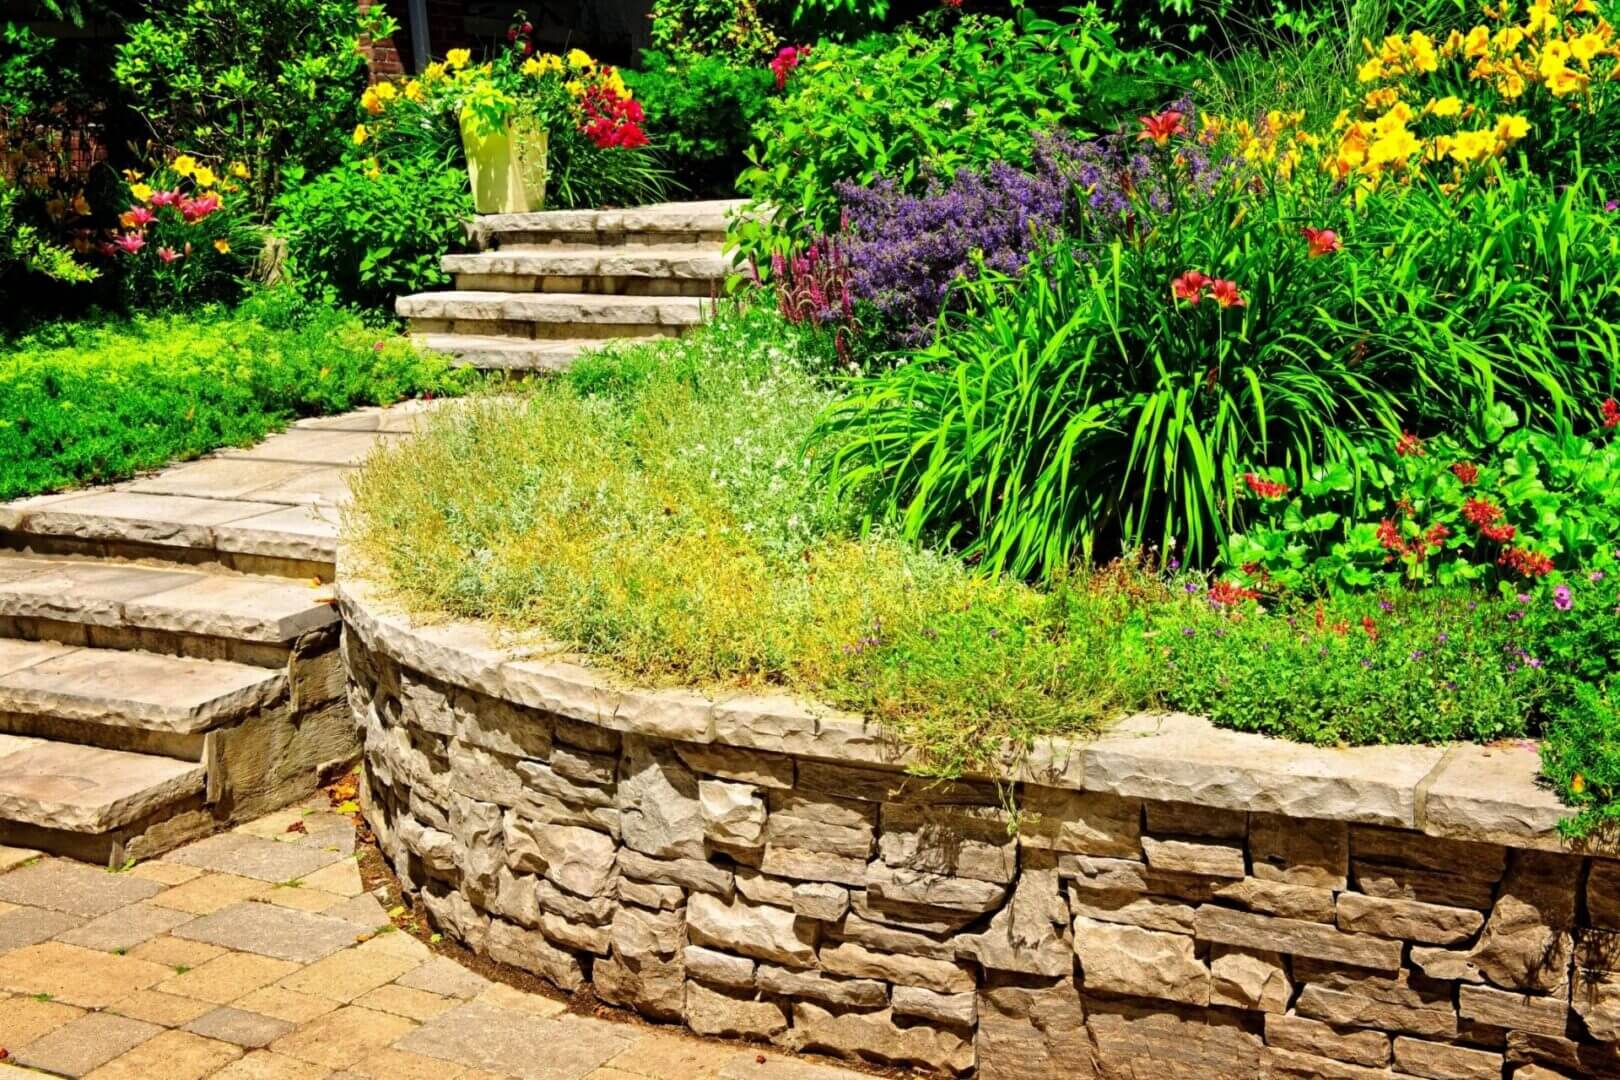 A stone wall with steps and plants in the middle.